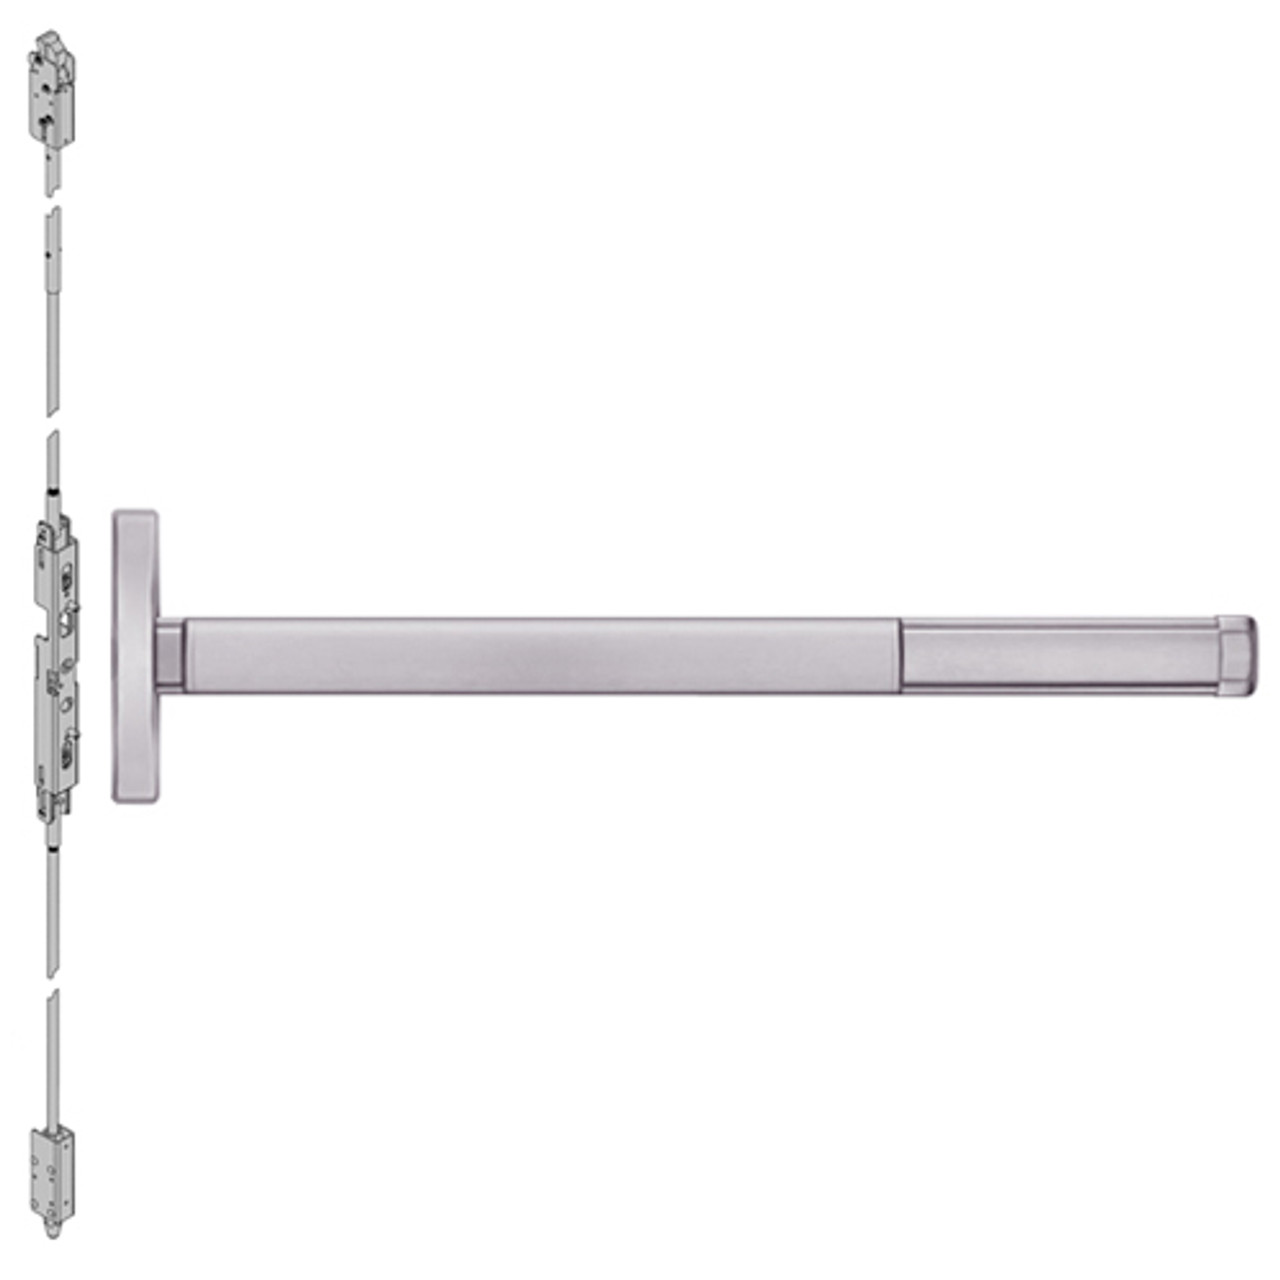 TSFL2601LBR-630-48 PHI 2600 Series Fire Rated Concealed Vertical Rod Exit Device with Touchbar Monitoring Switch Prepped for Cover Plate in Satin Stainless Steel Finish